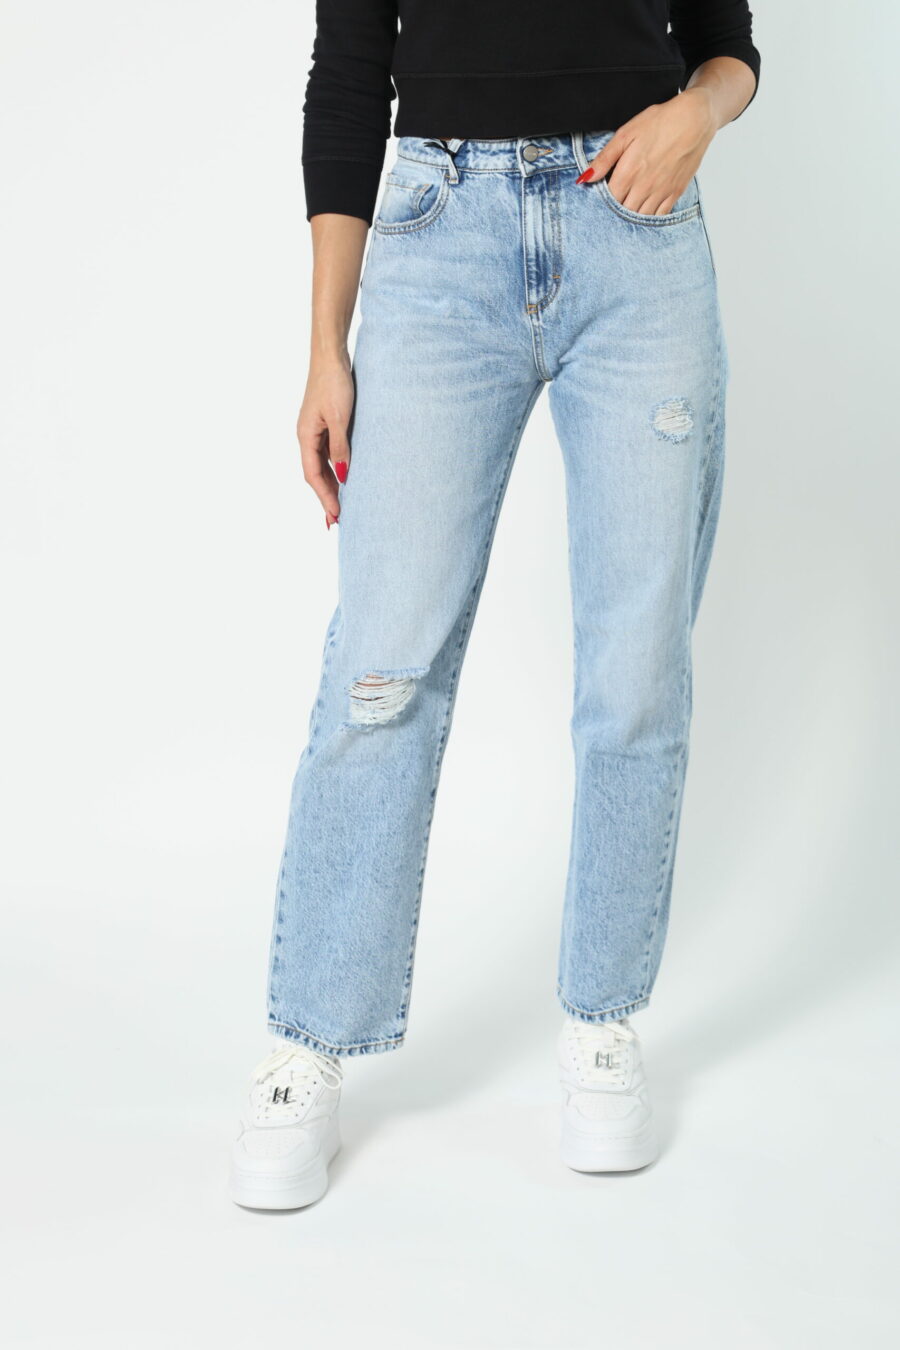 Blue denim trousers "bella" with minirotos - 8052865435499 8 scaled